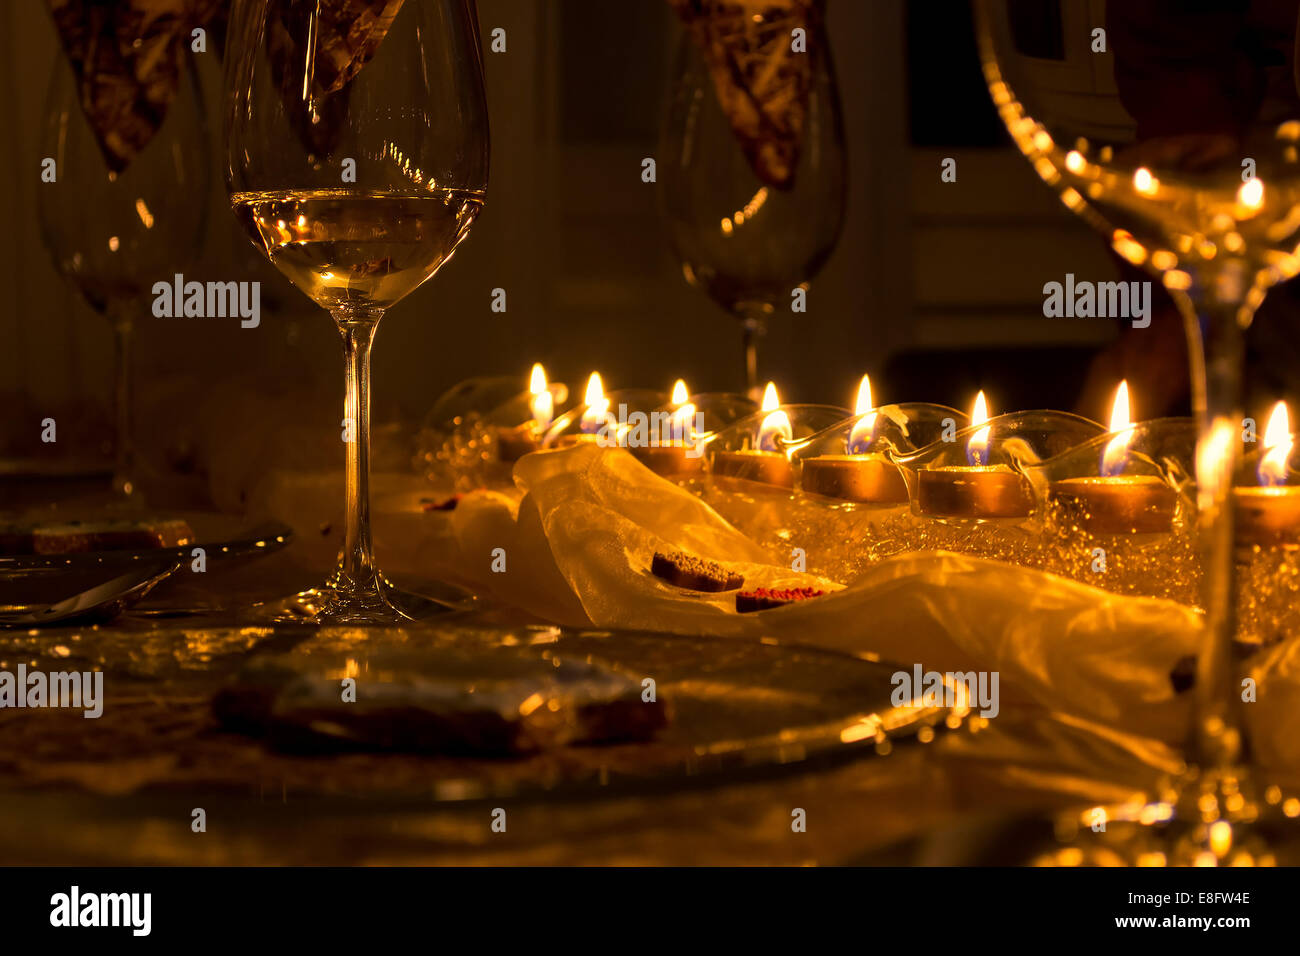 Solemn dining table Stock Photo